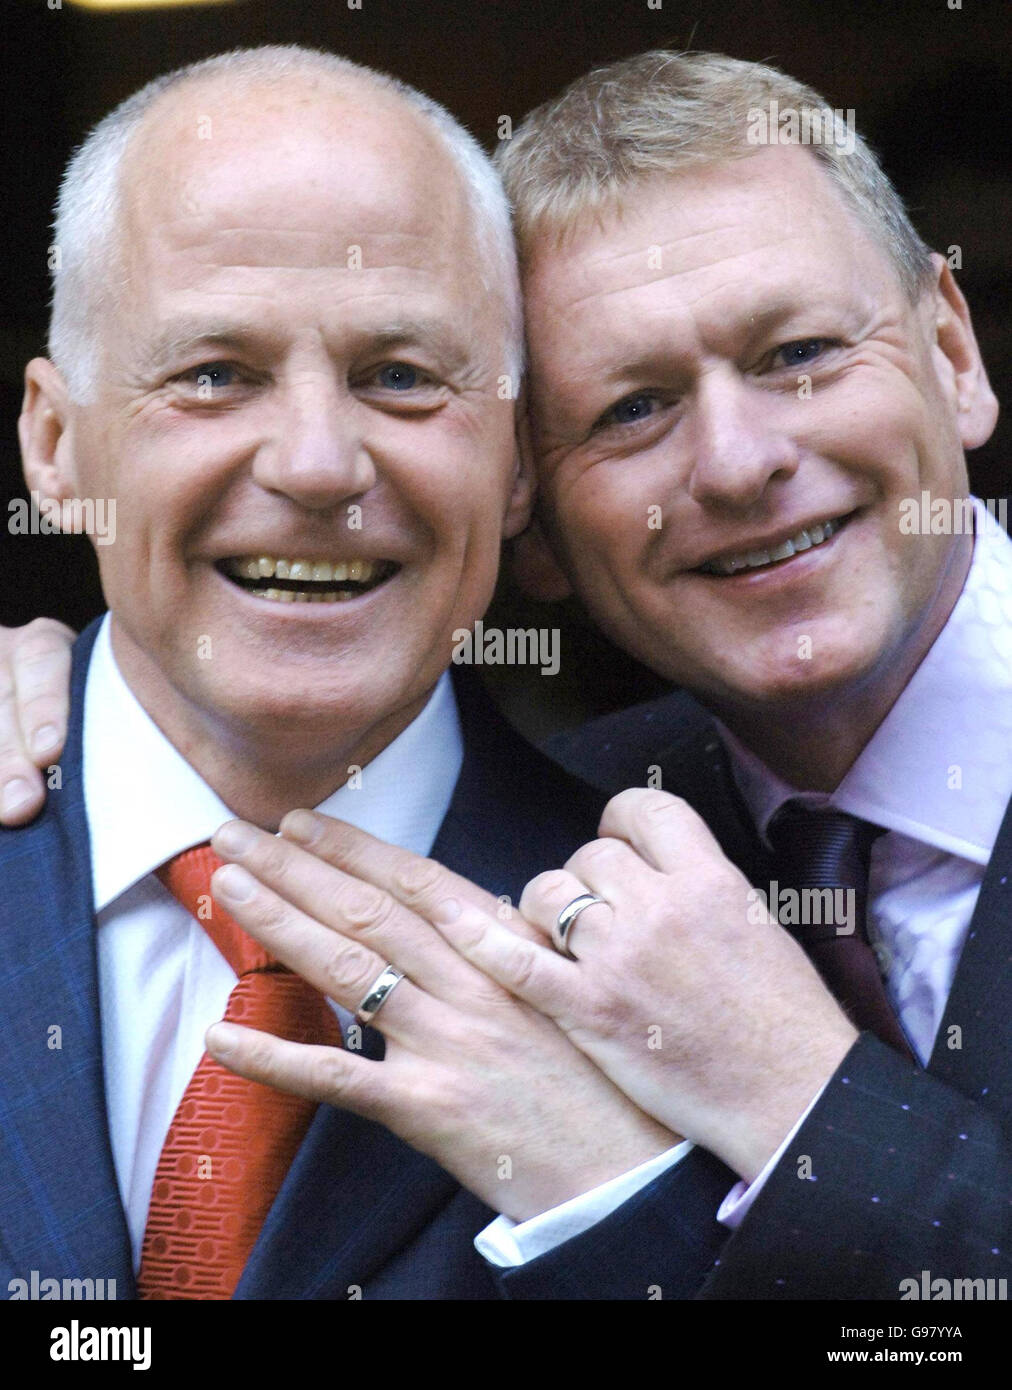 Former EastEnders star Michael Cashman, 55, and his partner of 23 years Paul Cottingham, 41, show off their wedding rings after their civil partnership ceremony in London, Saturday March 11, 2006. Mr Cashman, who is now a Labour Euro-MP and gay rights activist, played the first major gay character in EastEnders in the mid-1980s. See PA Story SHOWBIZ Wedding. PRESS ASSOCIATION Photo. Photo credit should read: Stefan Rousseau/PA. Stock Photo